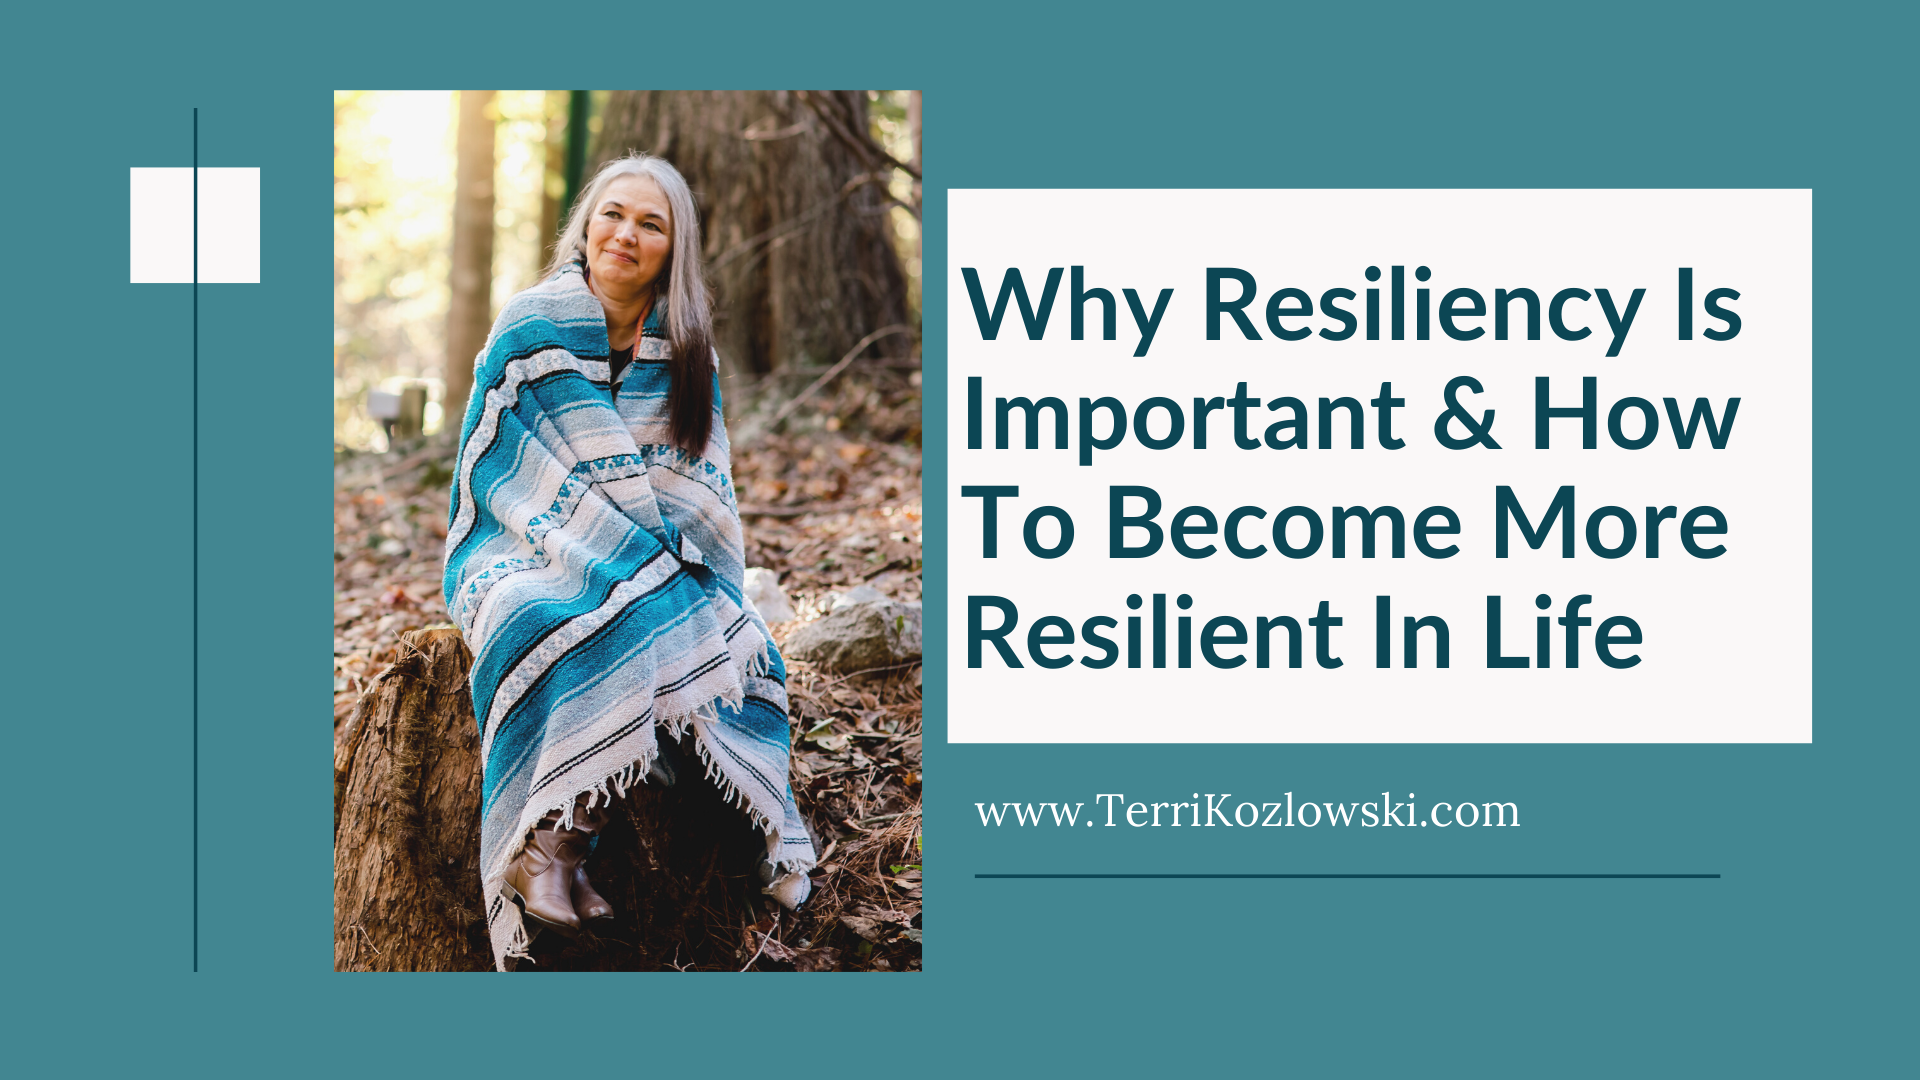 Be resilient to ease life